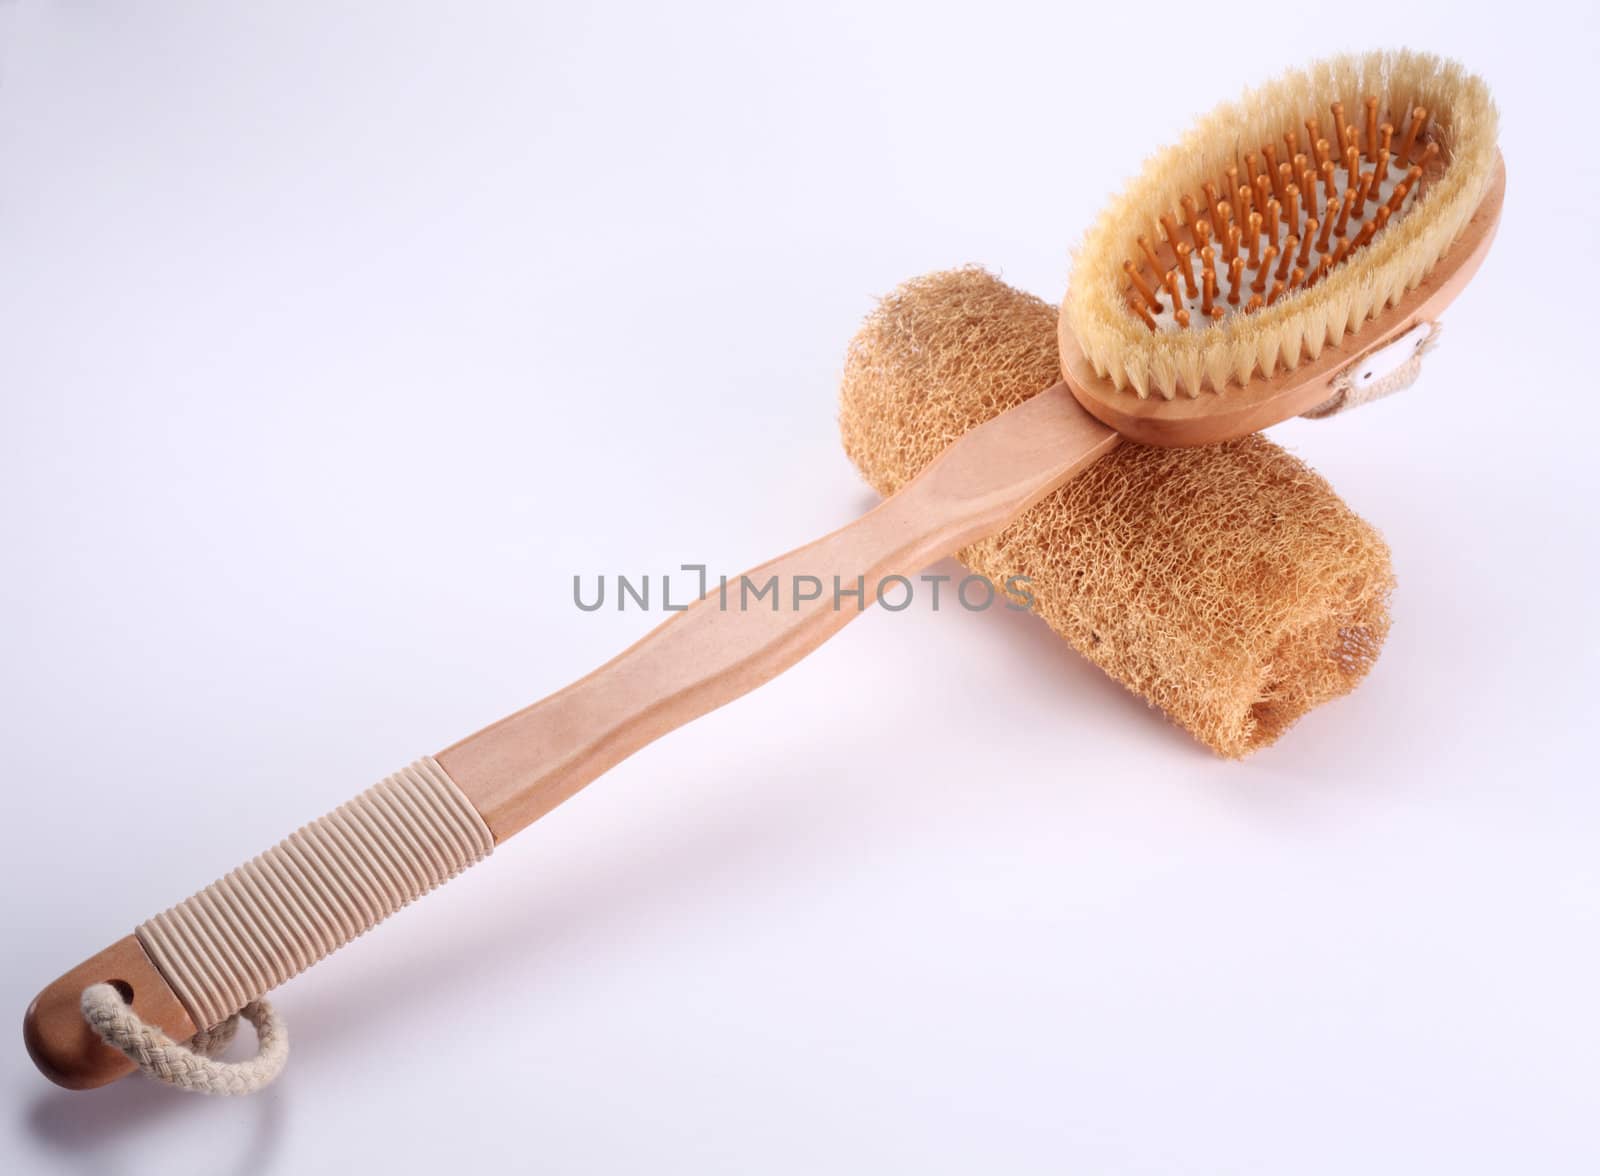 brush resting on the loofah on the white background